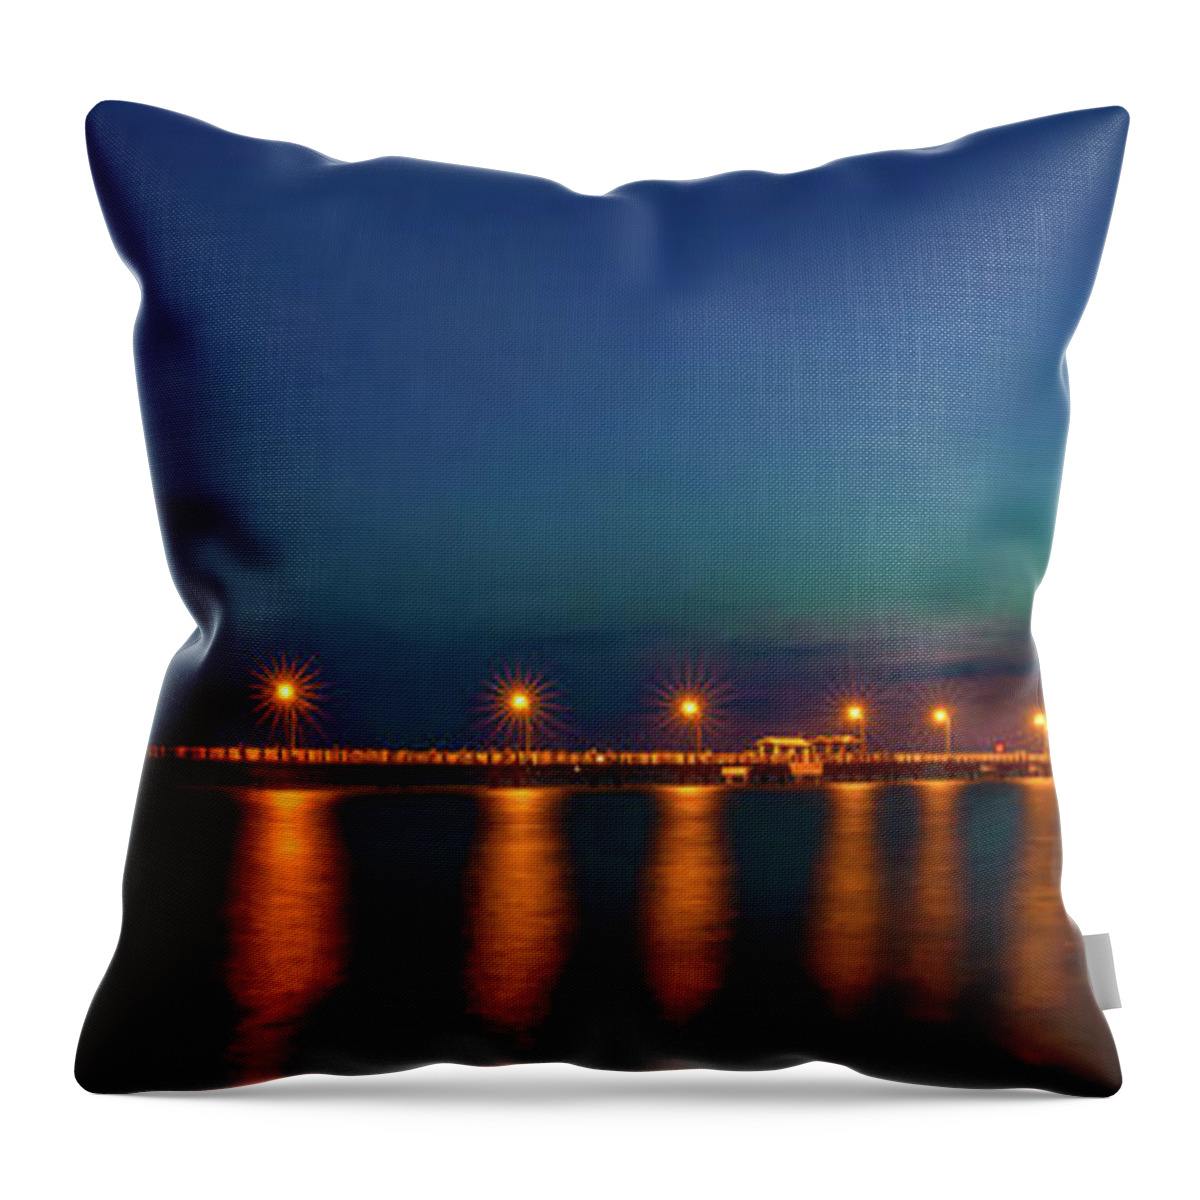 Photographs Throw Pillow featuring the photograph Fishing Pier At Twilight by Felix Lai